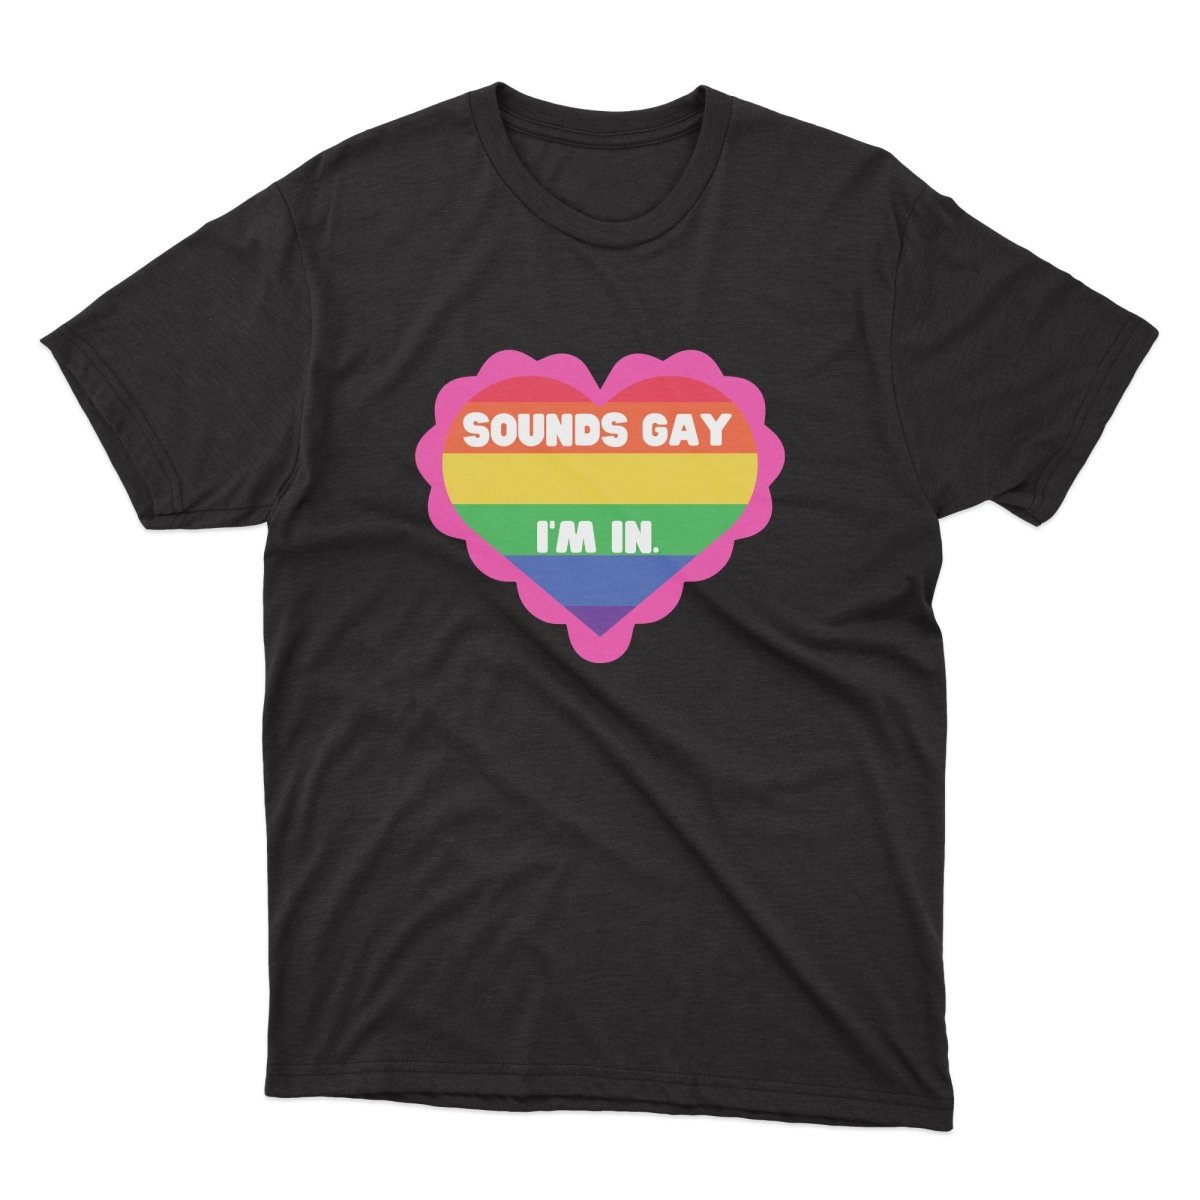 Sounds Gay I'm In Shirt - stickerbullSounds Gay I'm In ShirtShirtsPrintifystickerbull32274239156767954481BlackSa black t - shirt with the words sounds gay on it